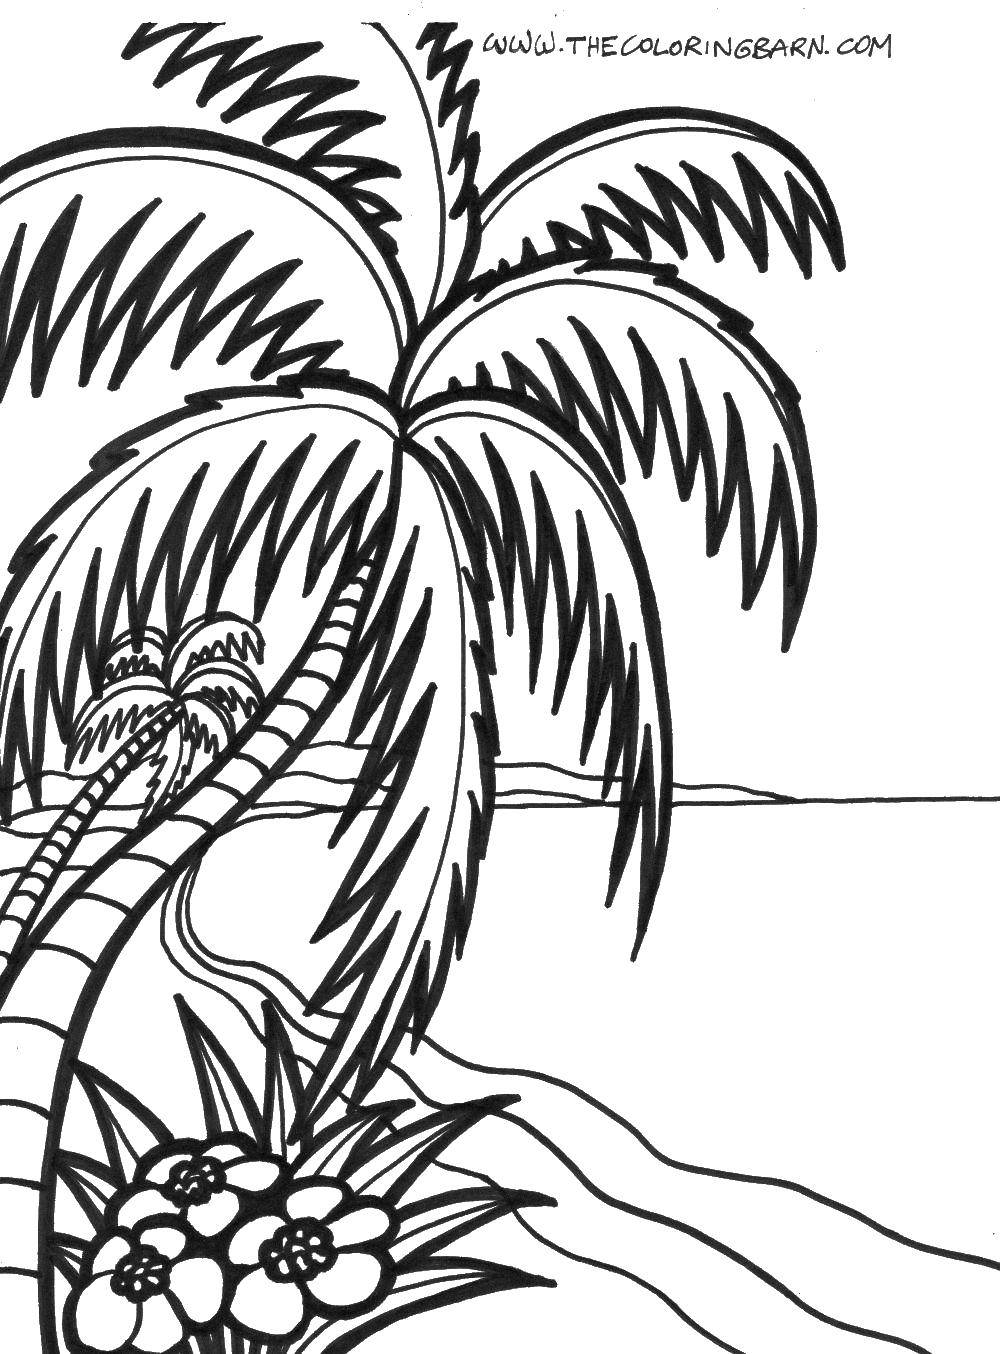 Coloring Palm trees and beach. Category Summer beach. Tags:  palm trees, sea, beach, flowers.